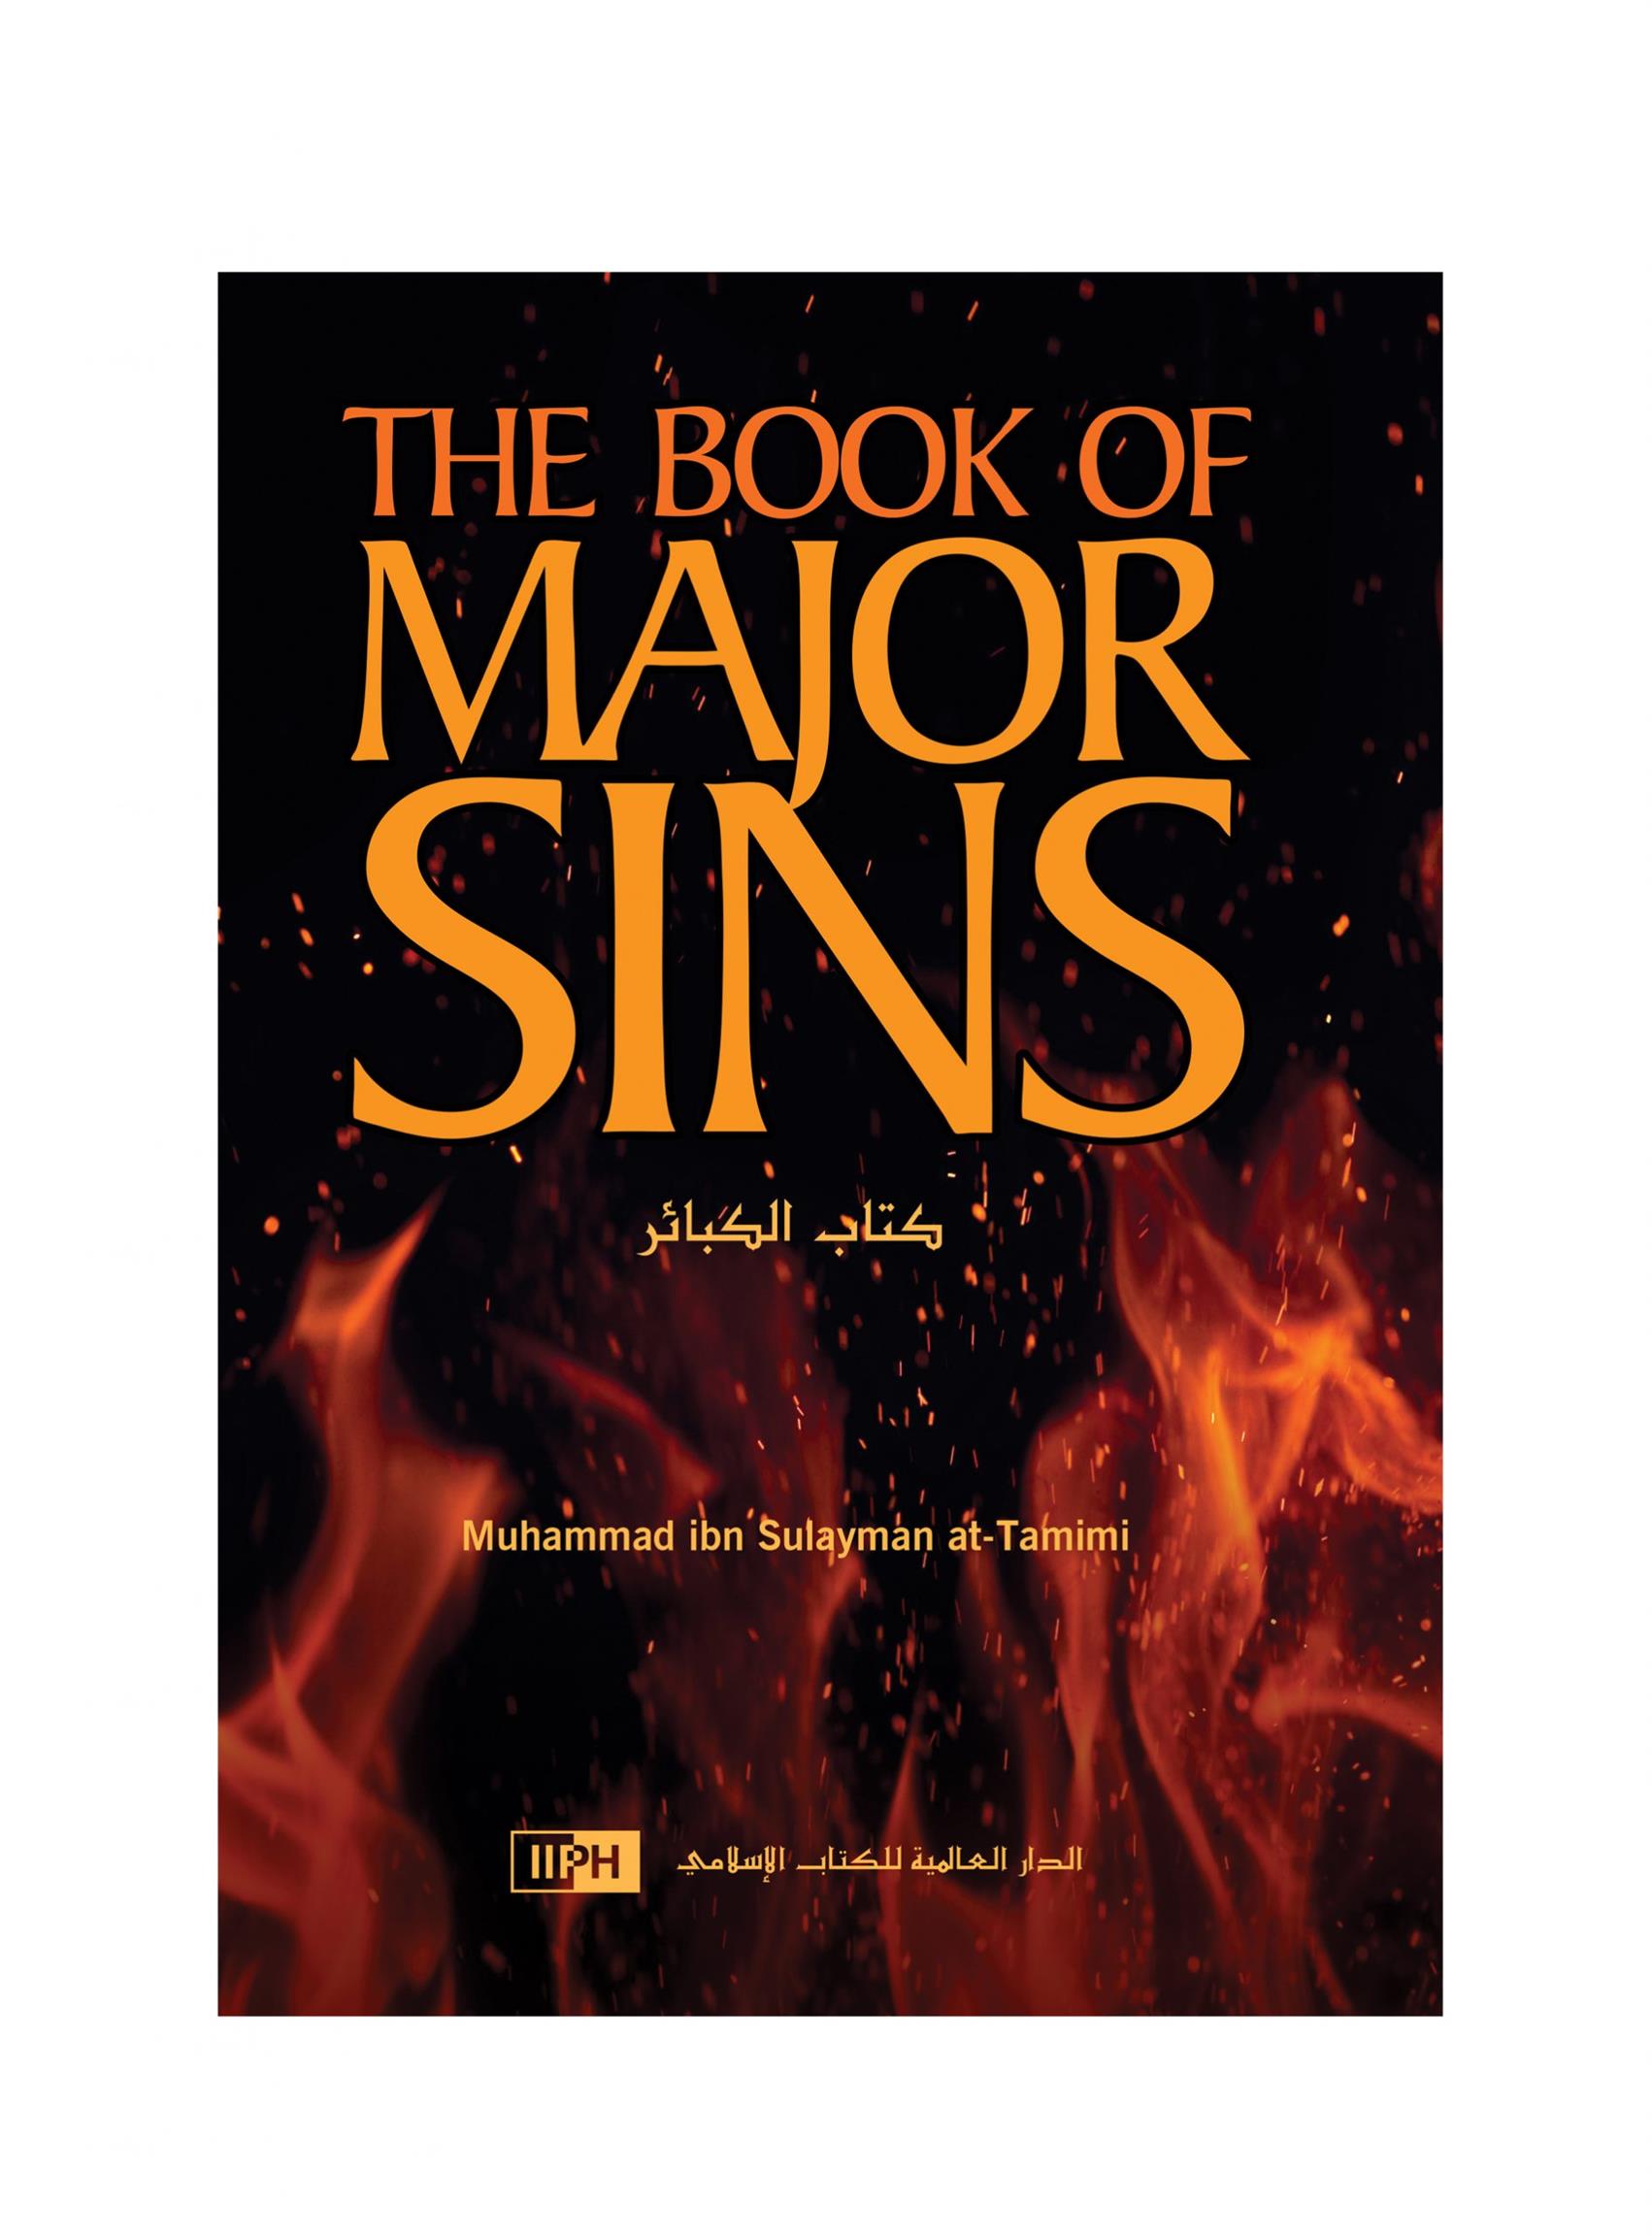  The Book of Major Sins by Muhammad ibn Sulayman 